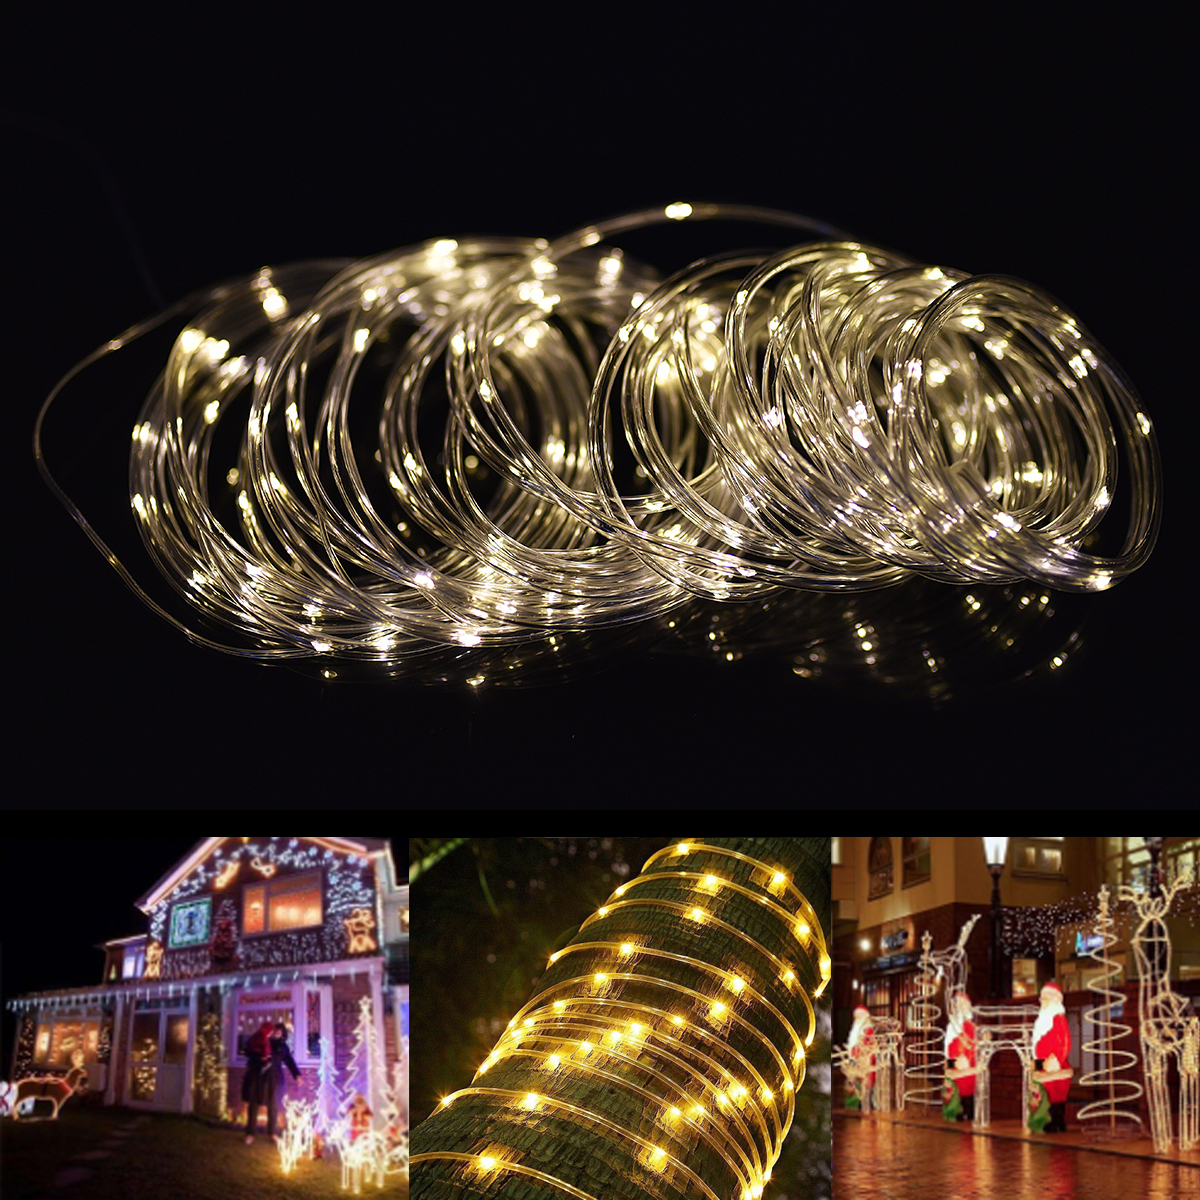 12M-Battery-Powered-120LED-String-Light-8-Modes-Remote-Control-Fairy-Lamp-Party-Christmas-Home-Decor-1351130-5